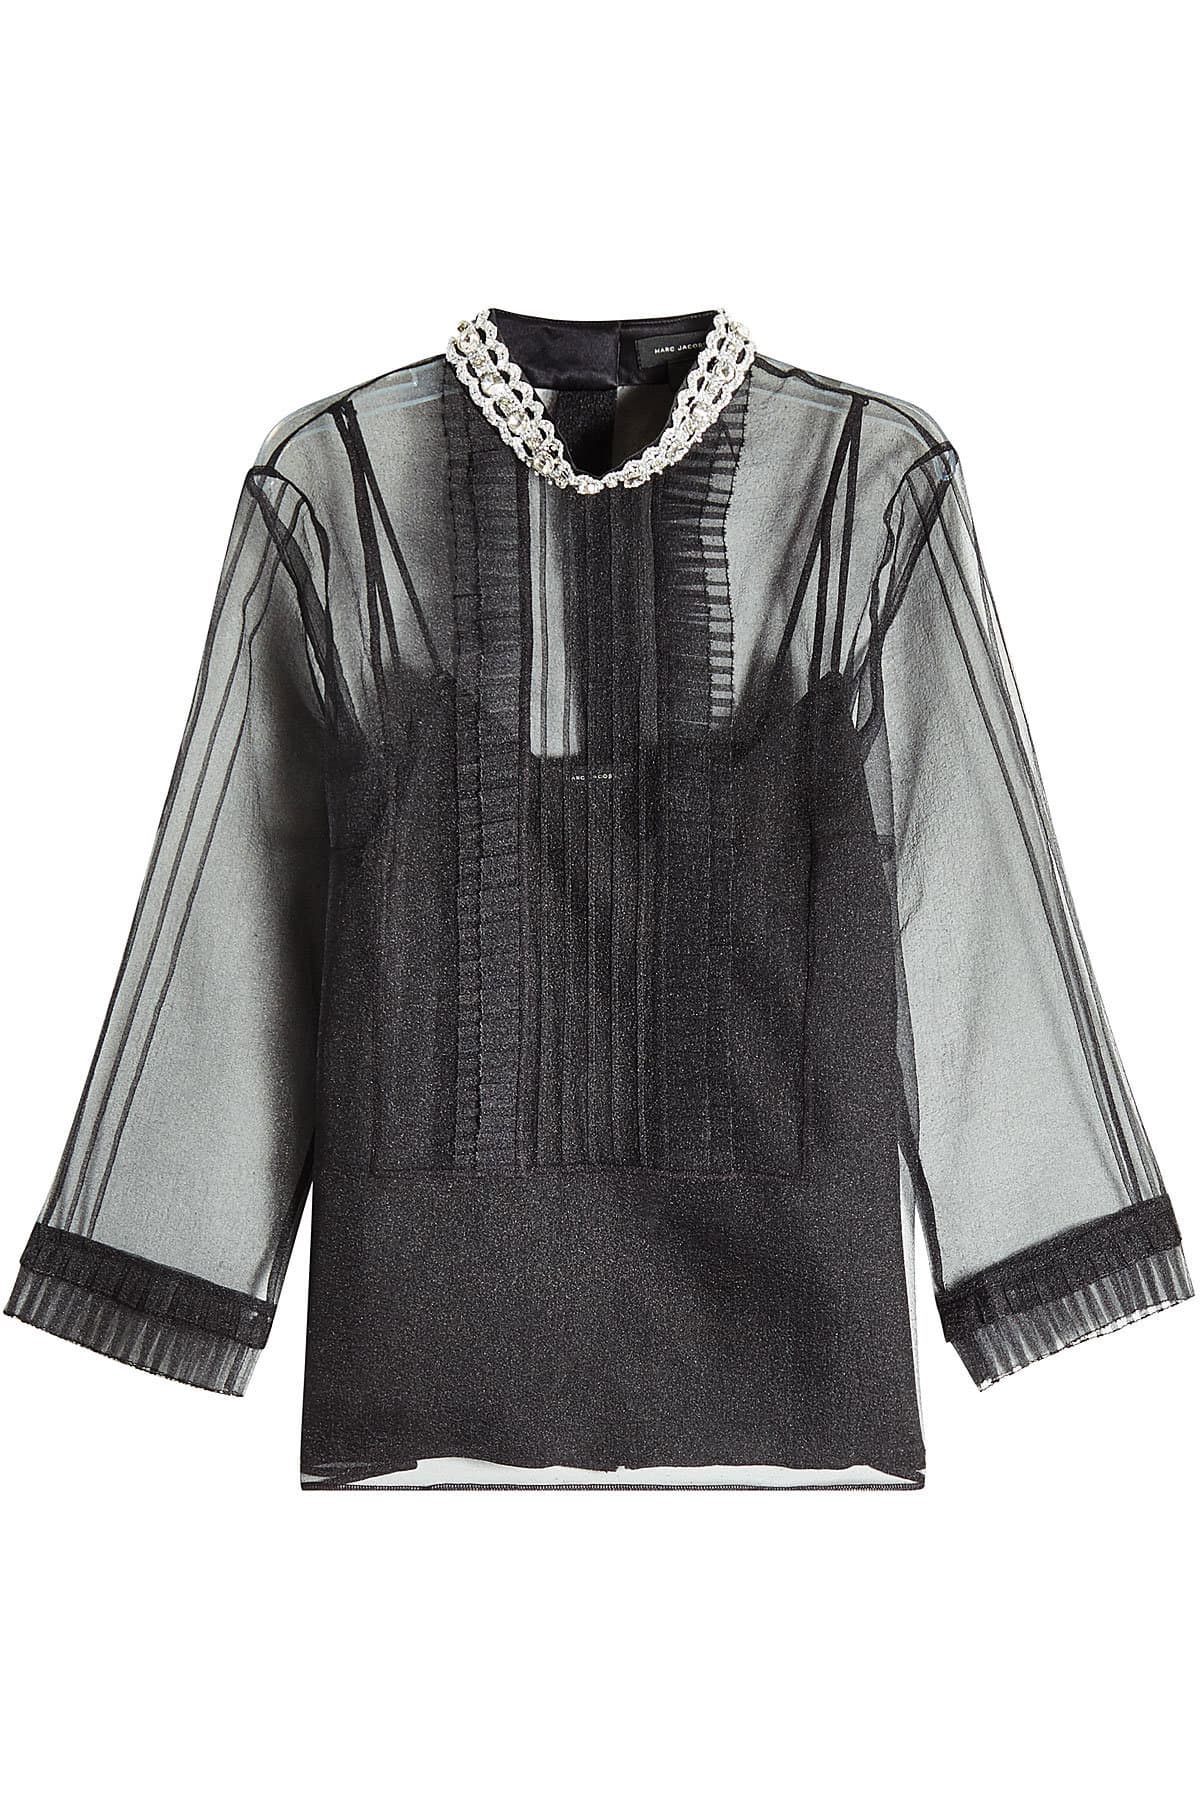 Marc Jacobs - Pintuck Embellished Blouse